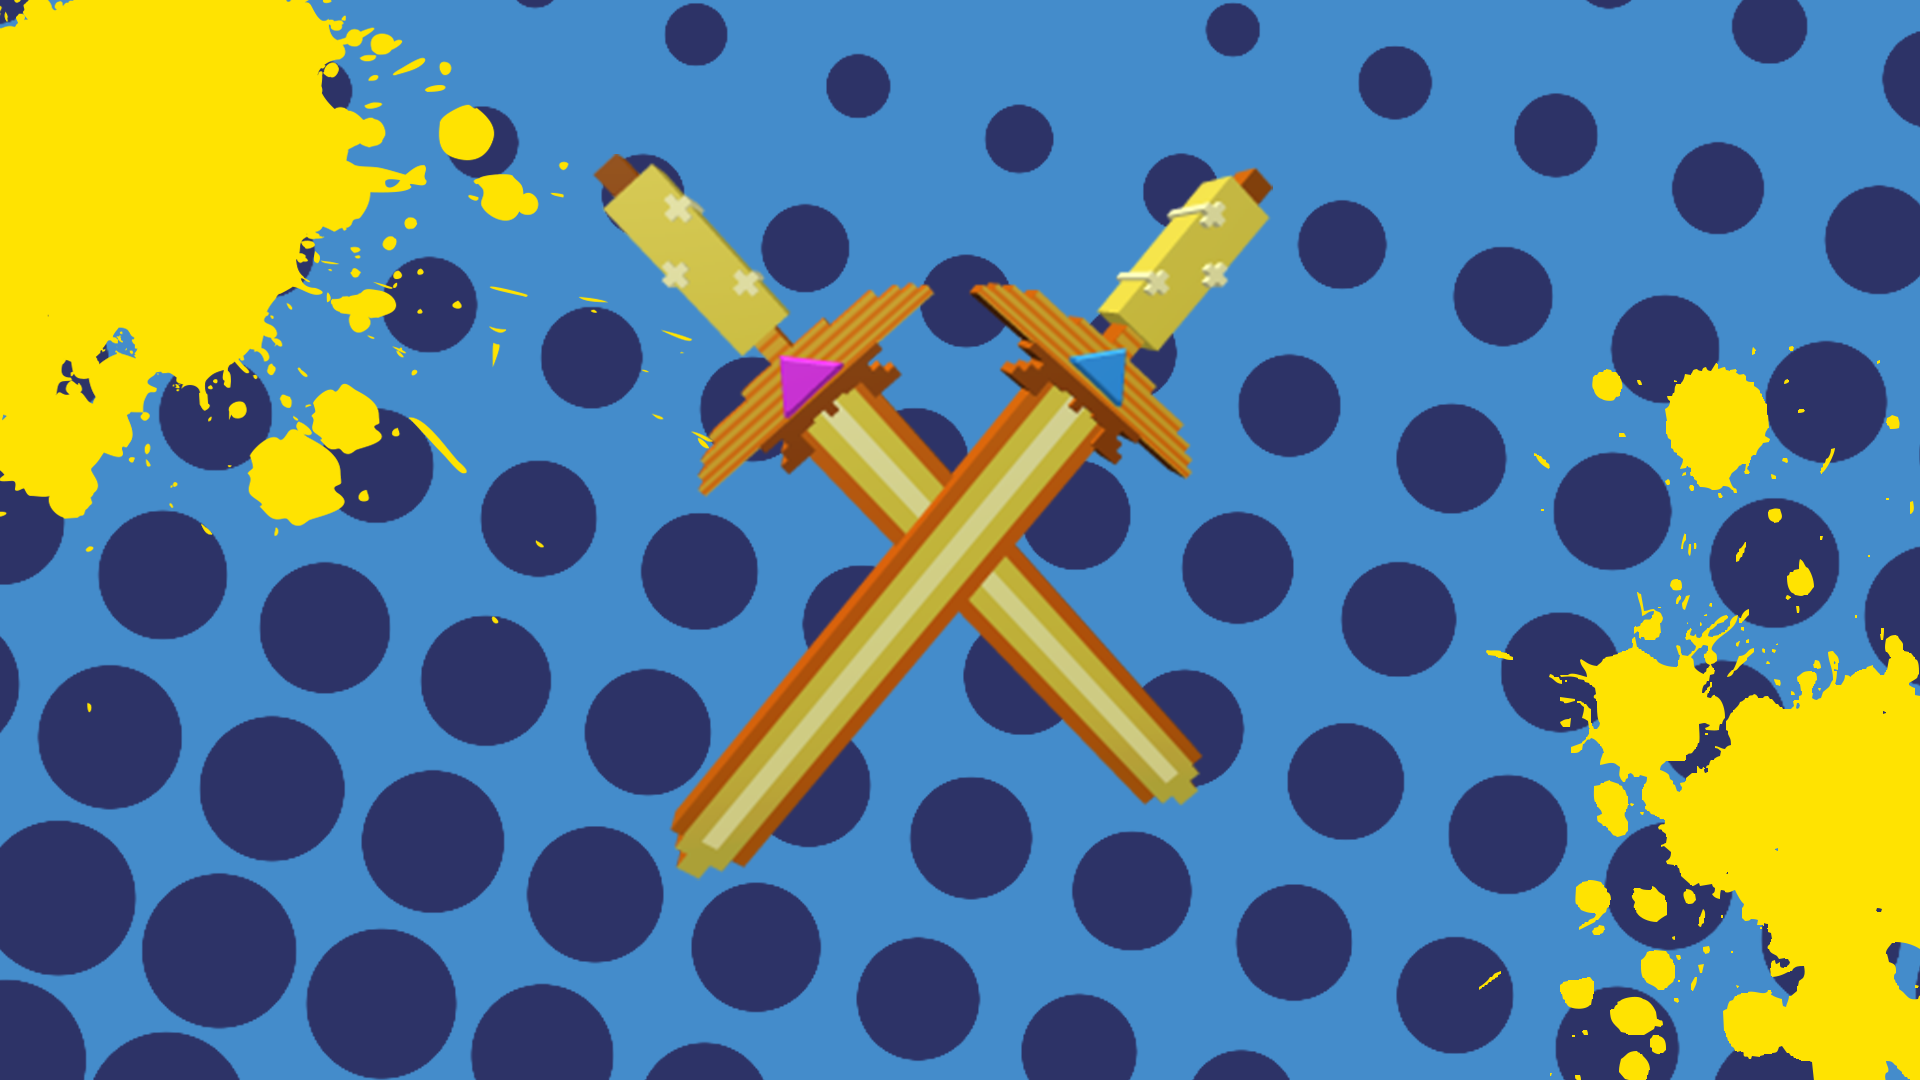 Roblox swords on blue background with splats